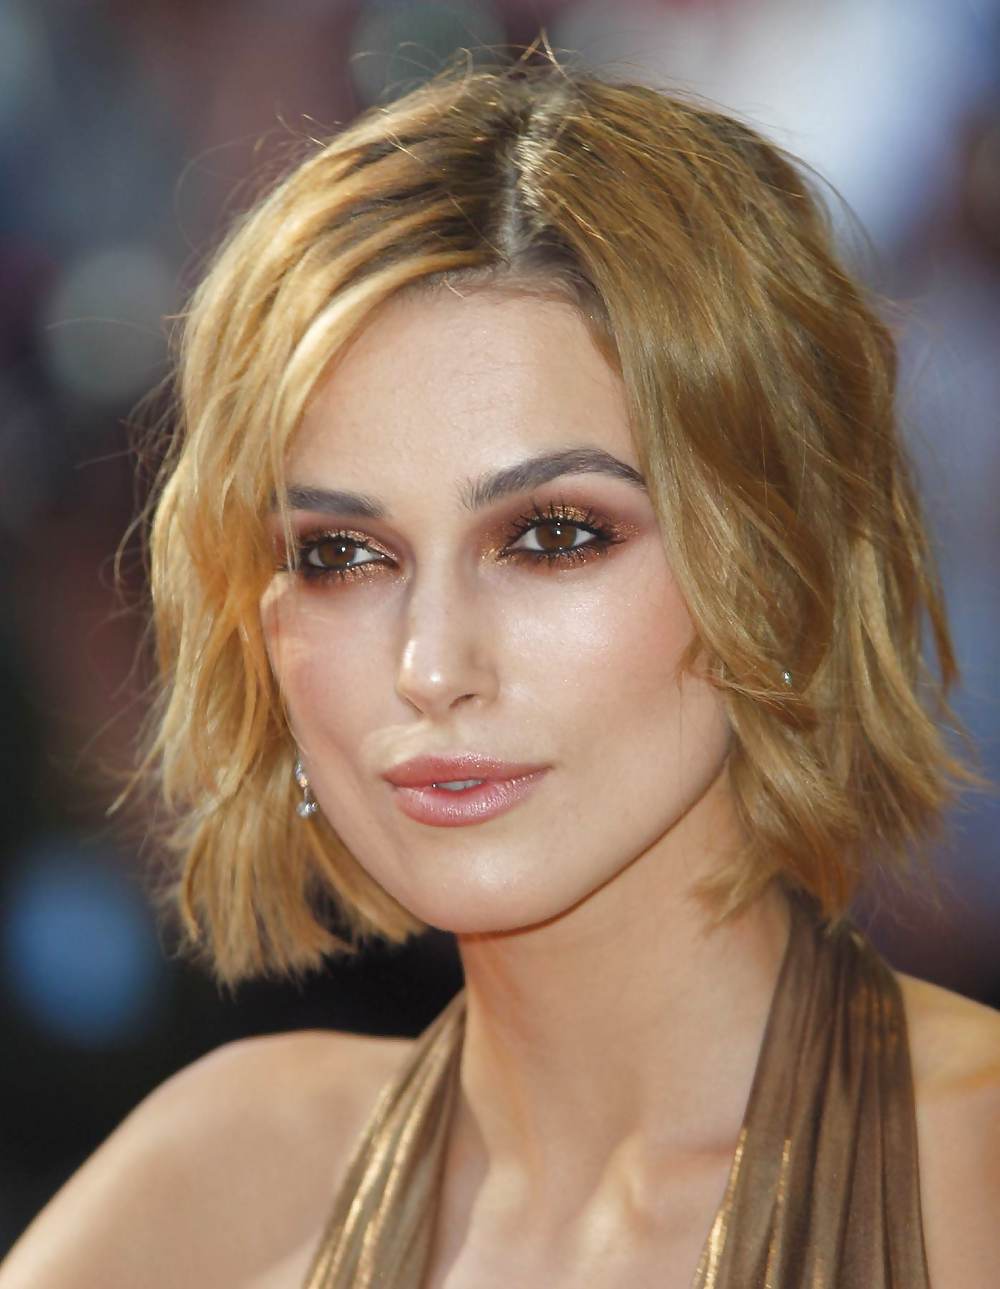 Keira Knightley The Royal Lady of England #35650359